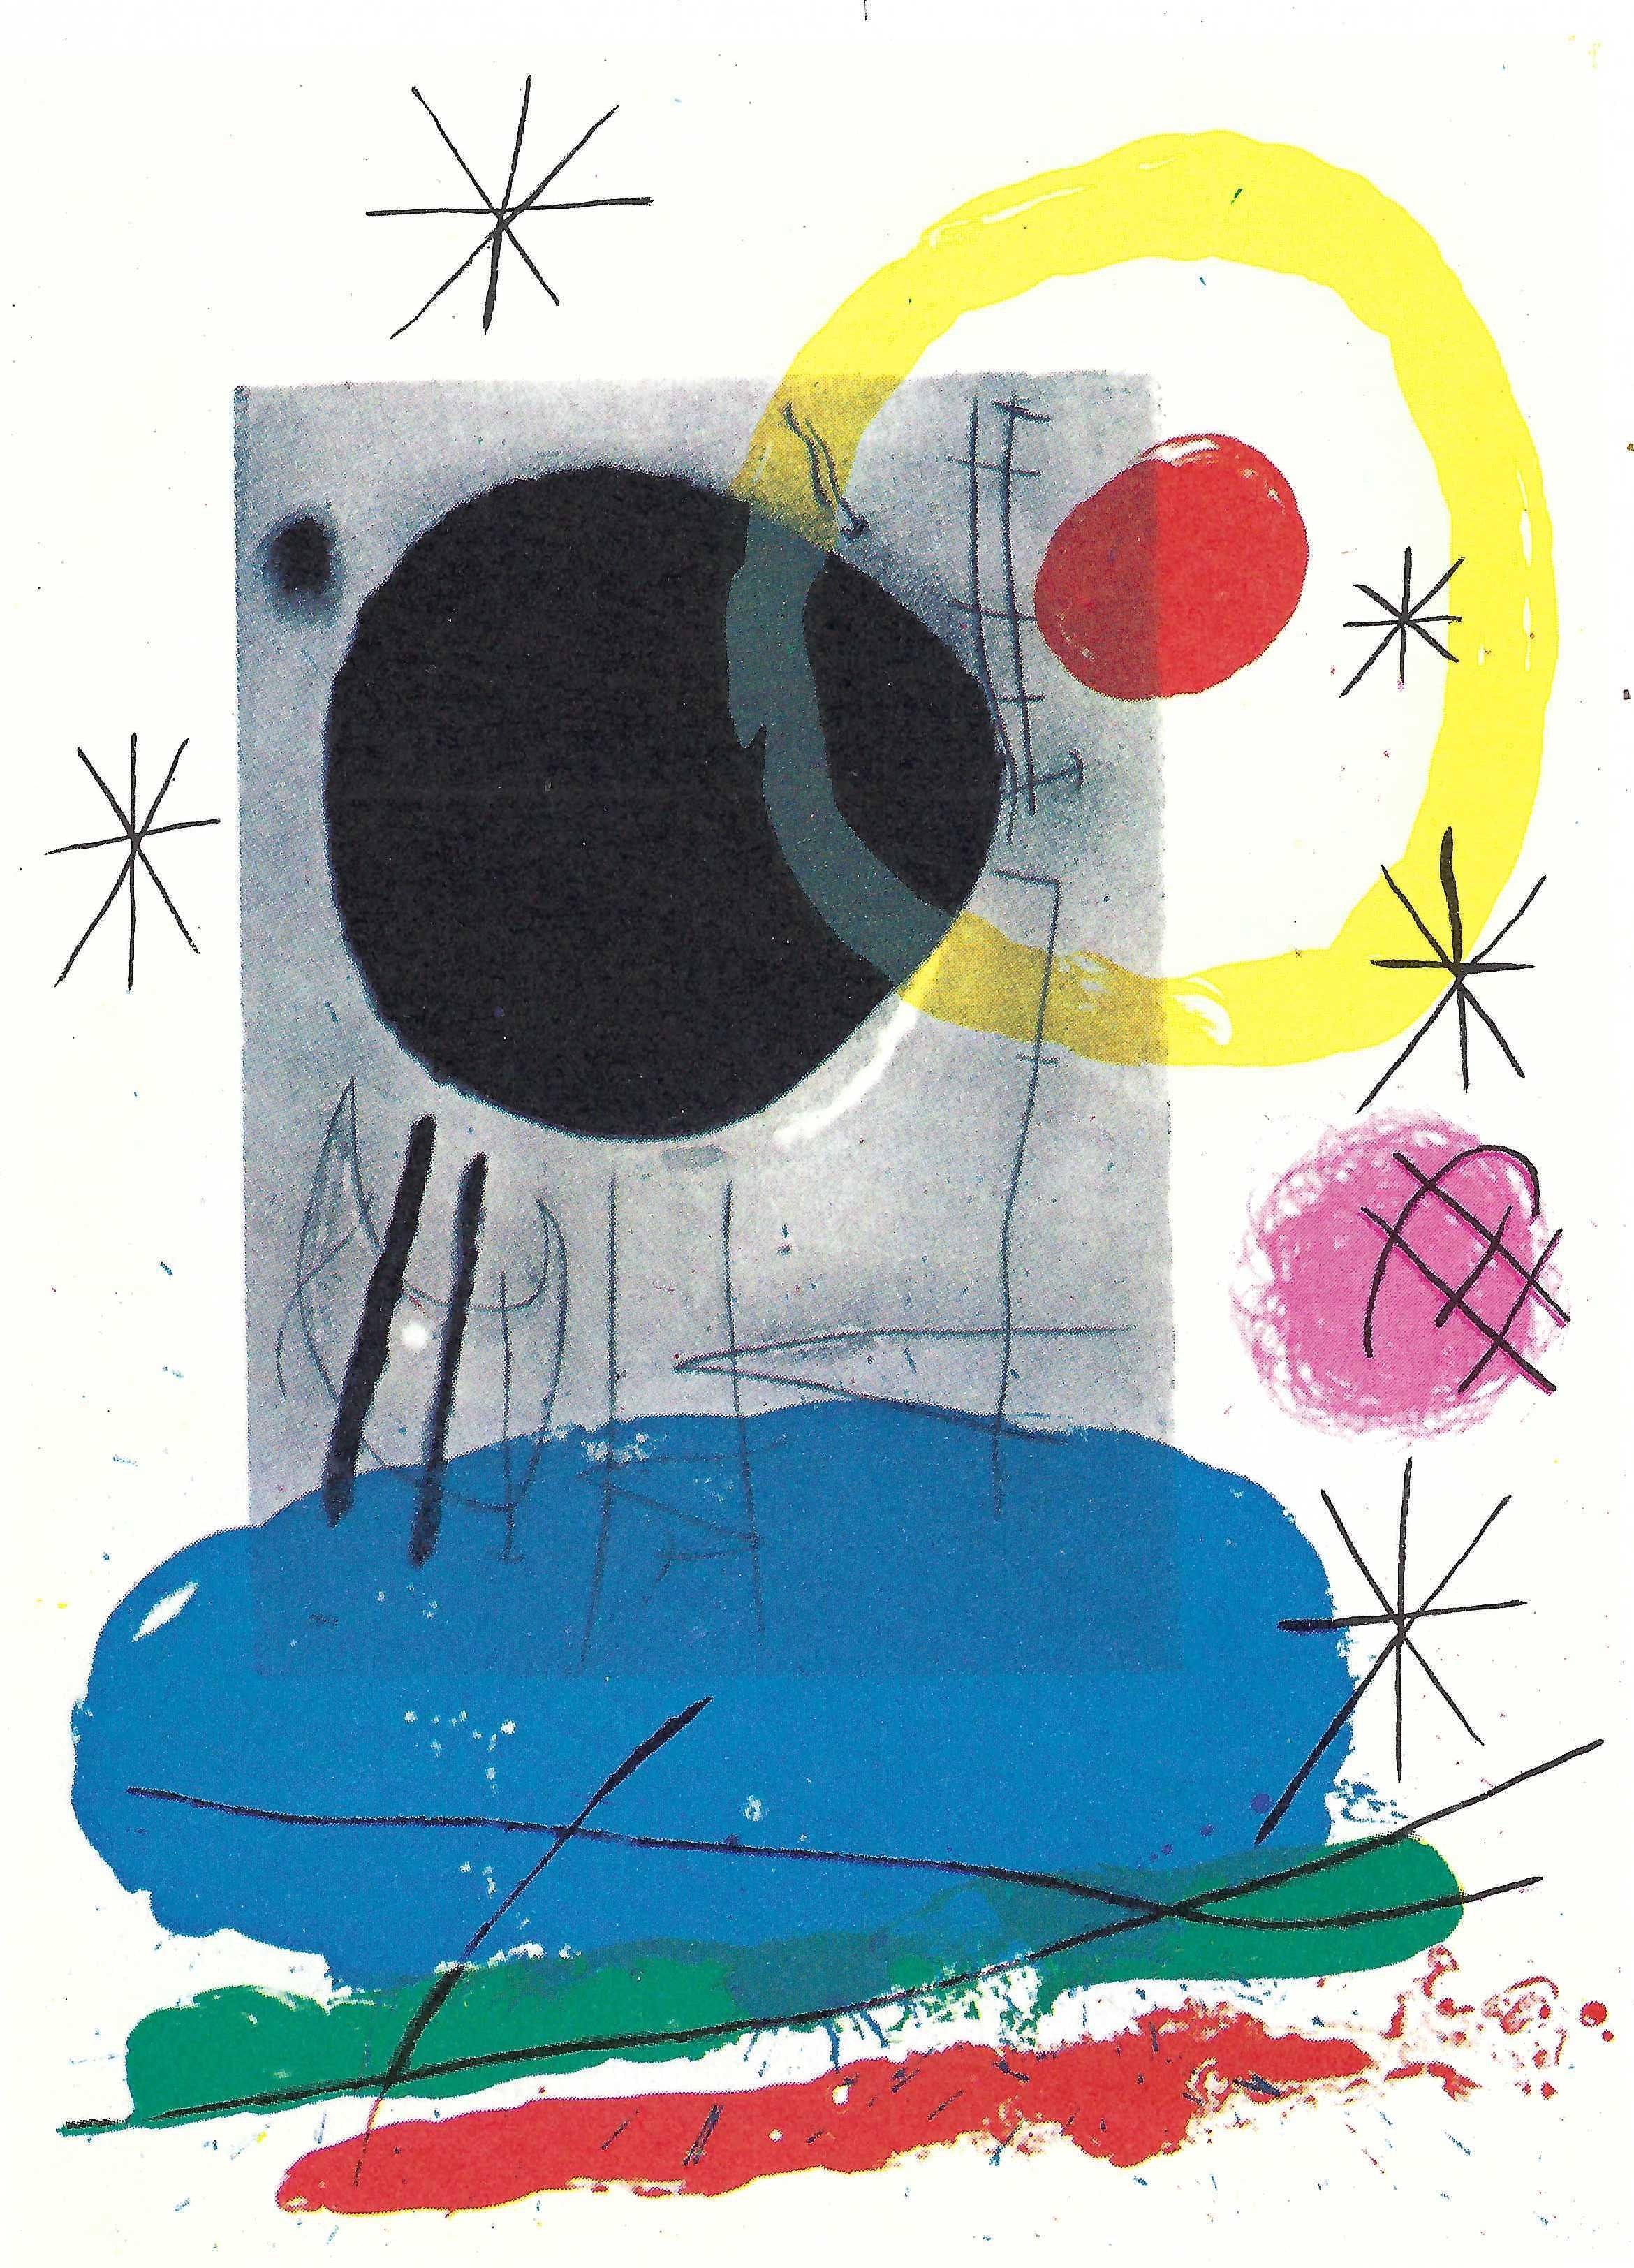 Joan Miró Abstract Print - Plate 5, from 1965 Peintures sur Cartons